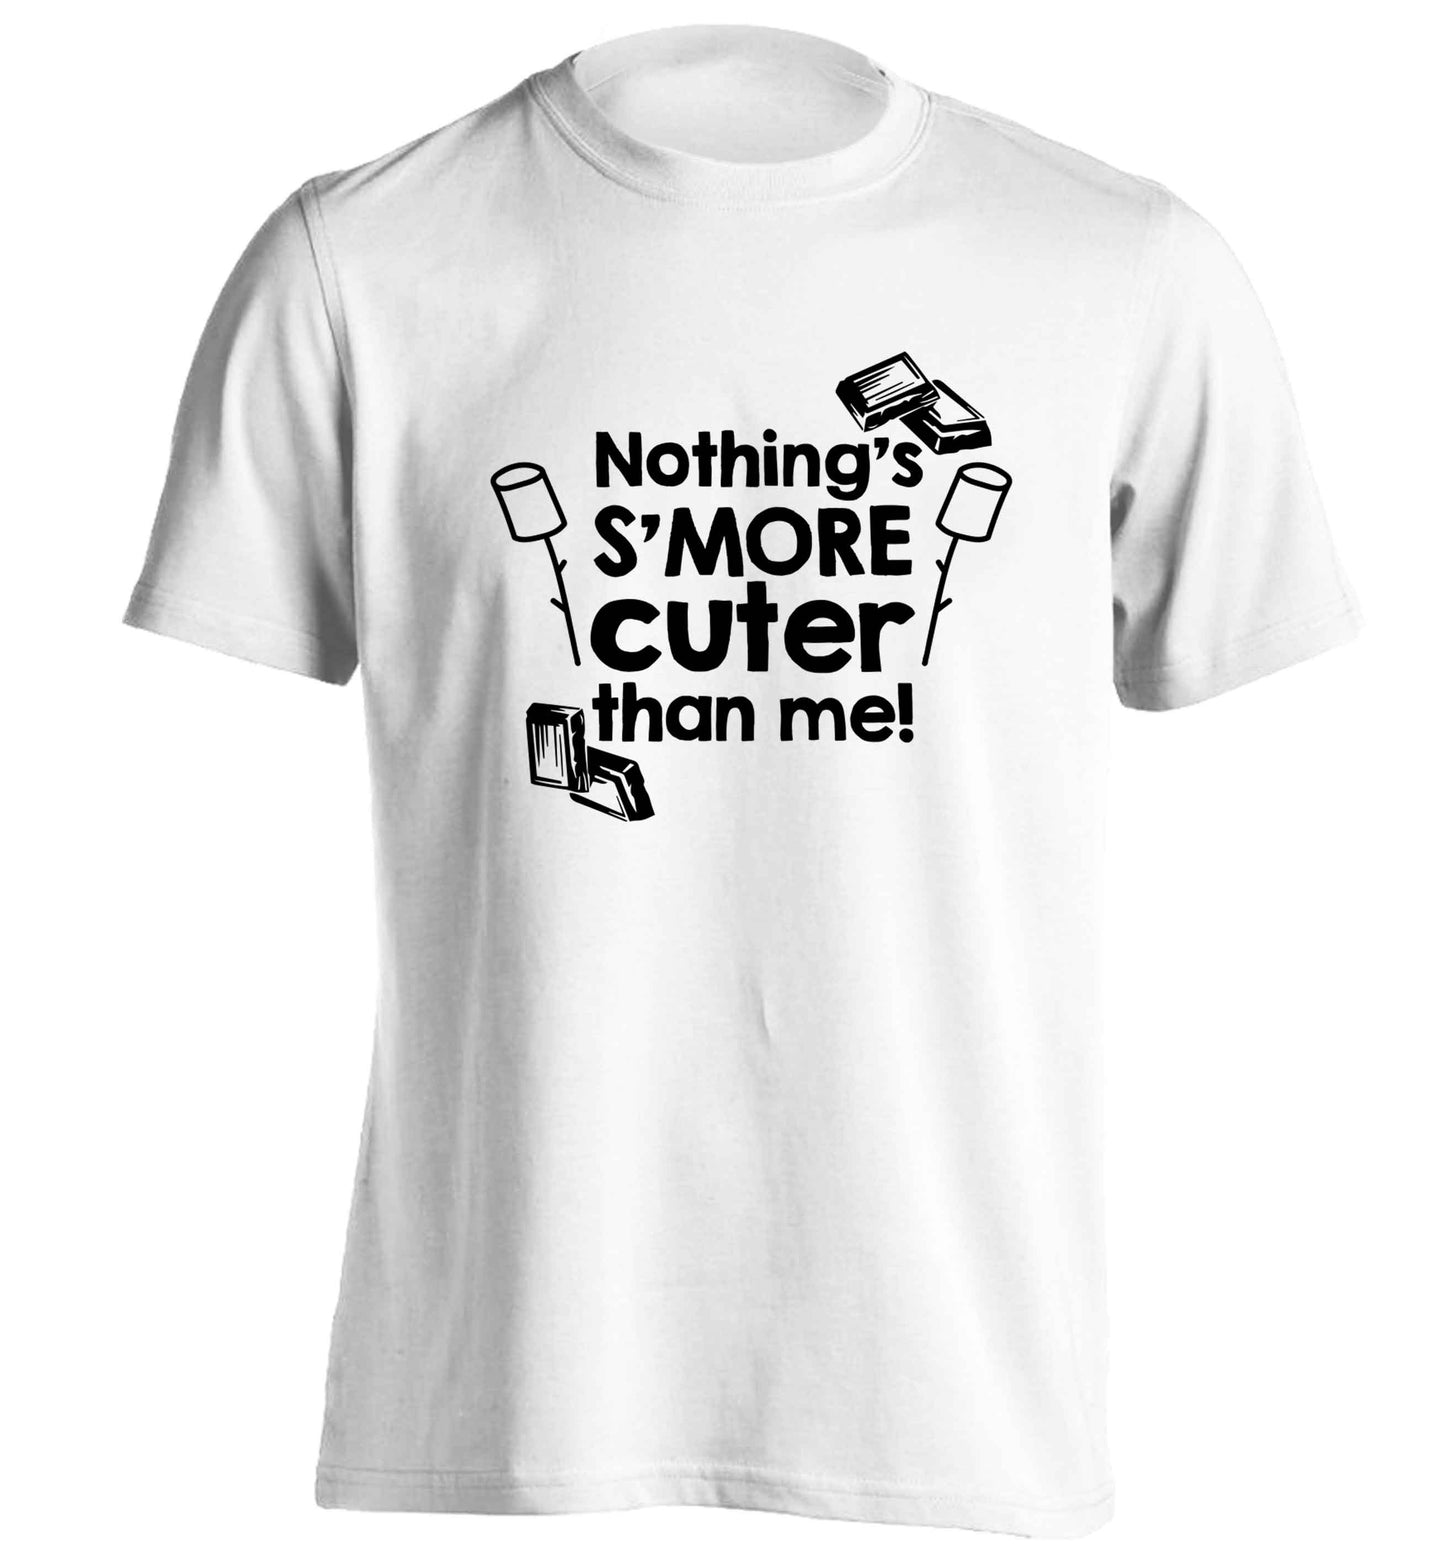 Nothing's s'more cuter than me! adults unisex white Tshirt 2XL